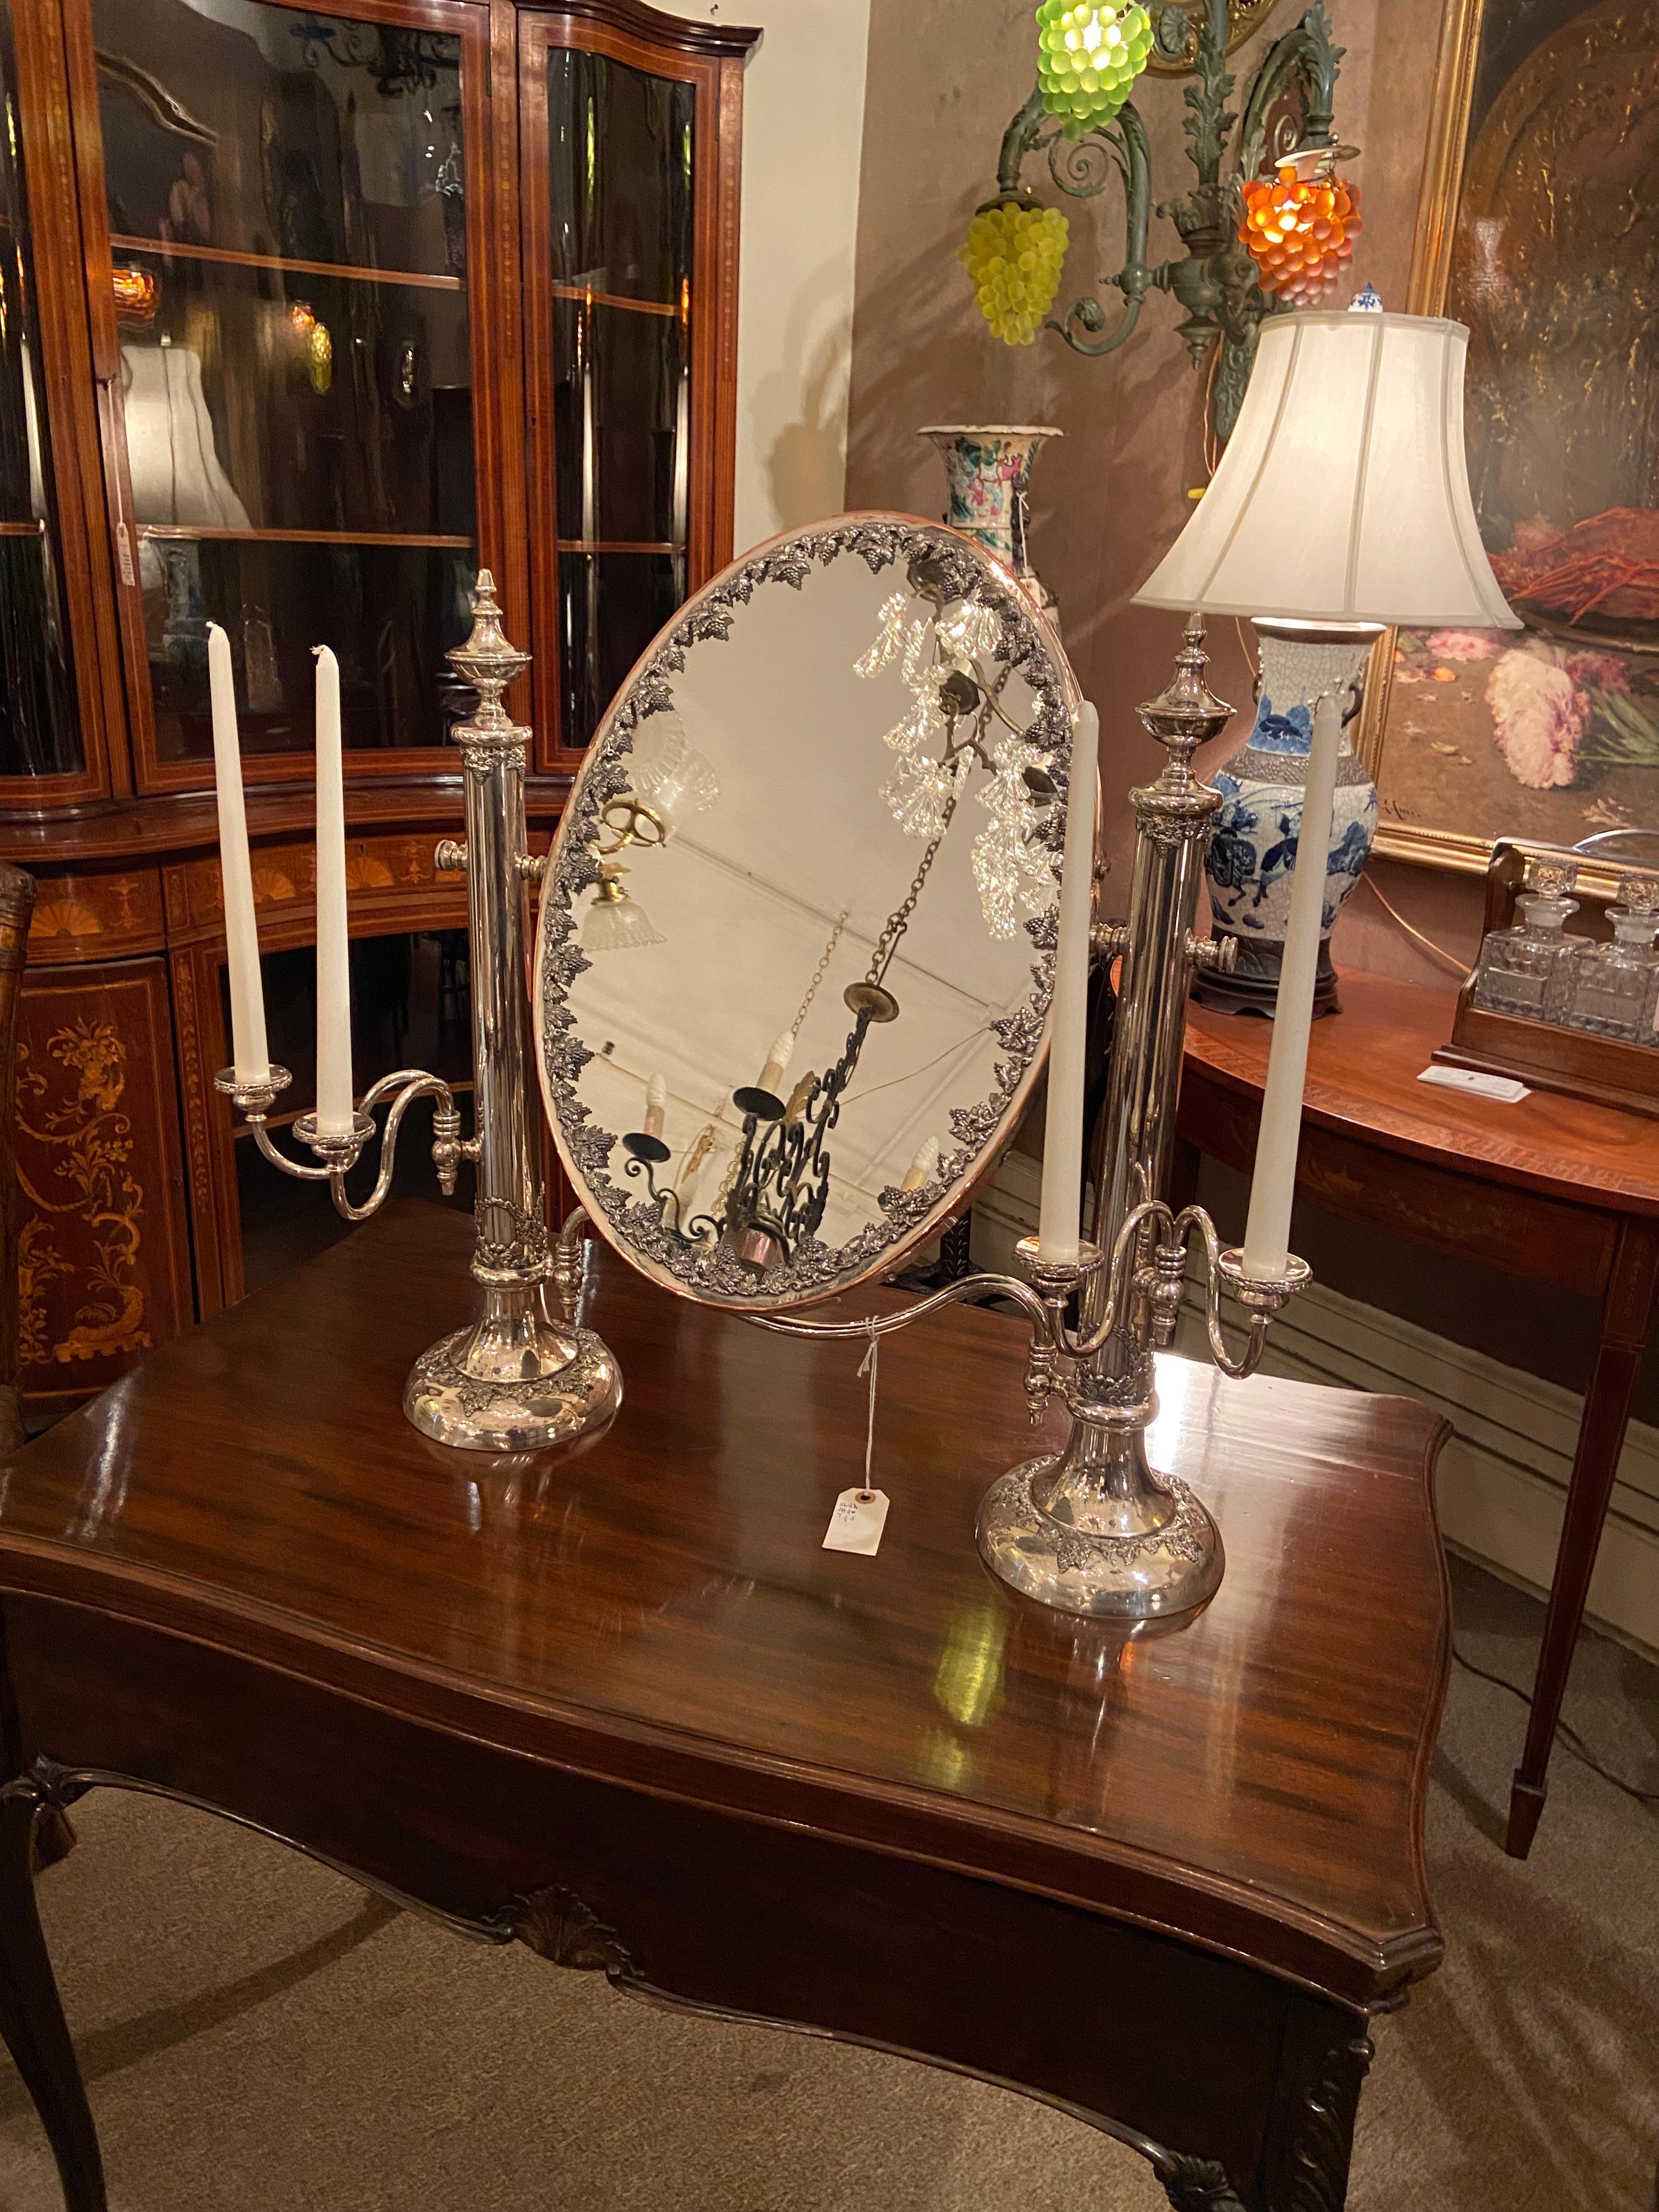 Antique American Silver-Plated Coiffeuse Mirror and Candelabra, Circa 1920-1930 For Sale 1